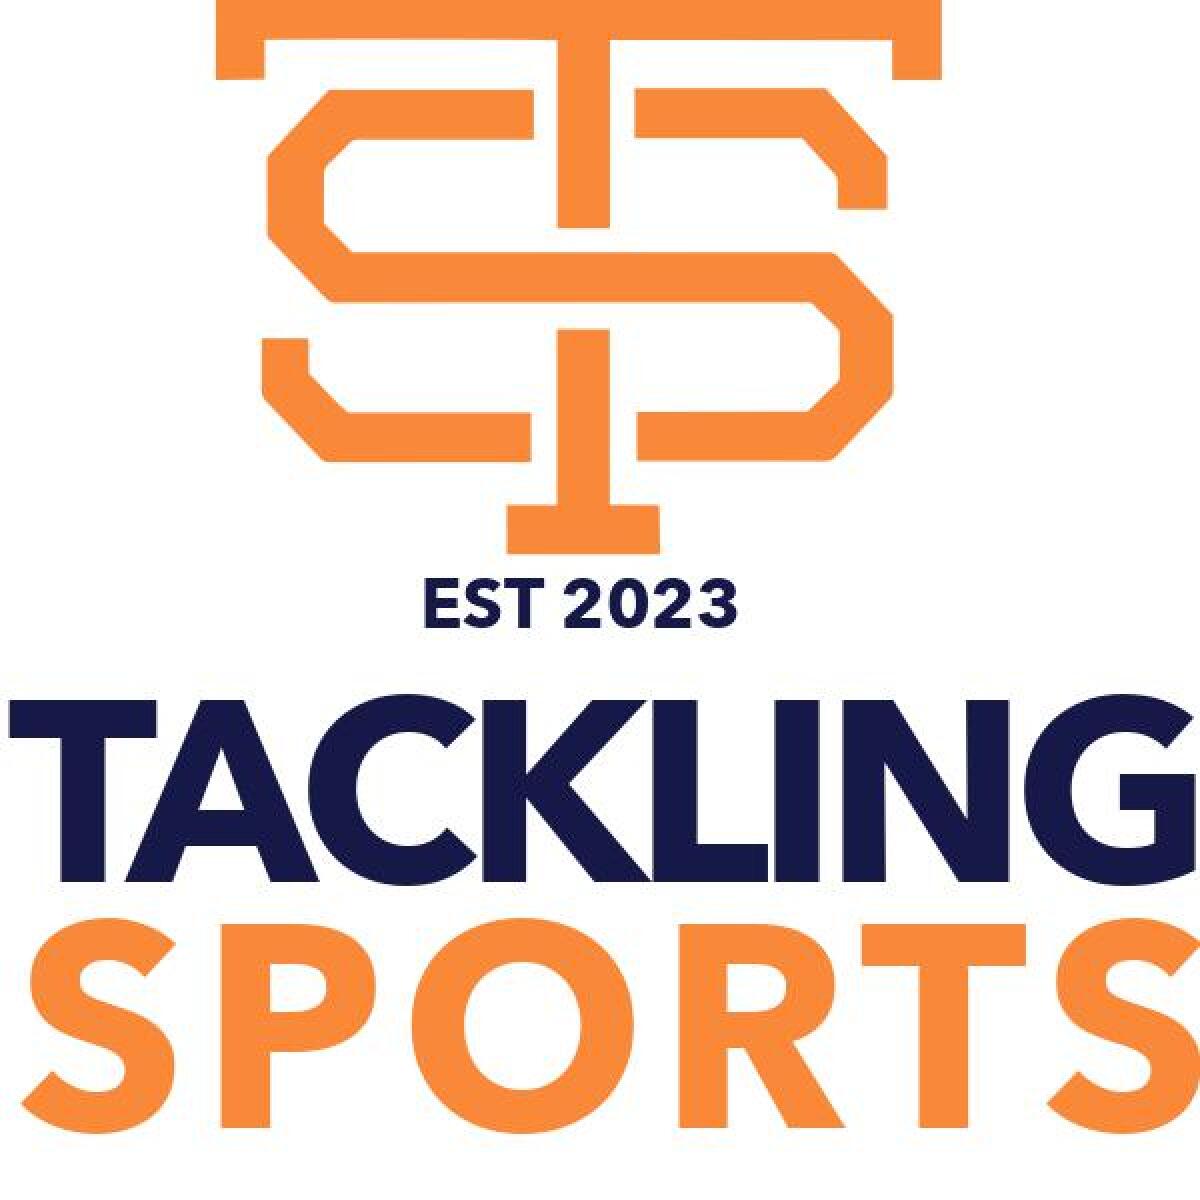 The logo for the Tackling Sports group, designed by Thom McElroy.